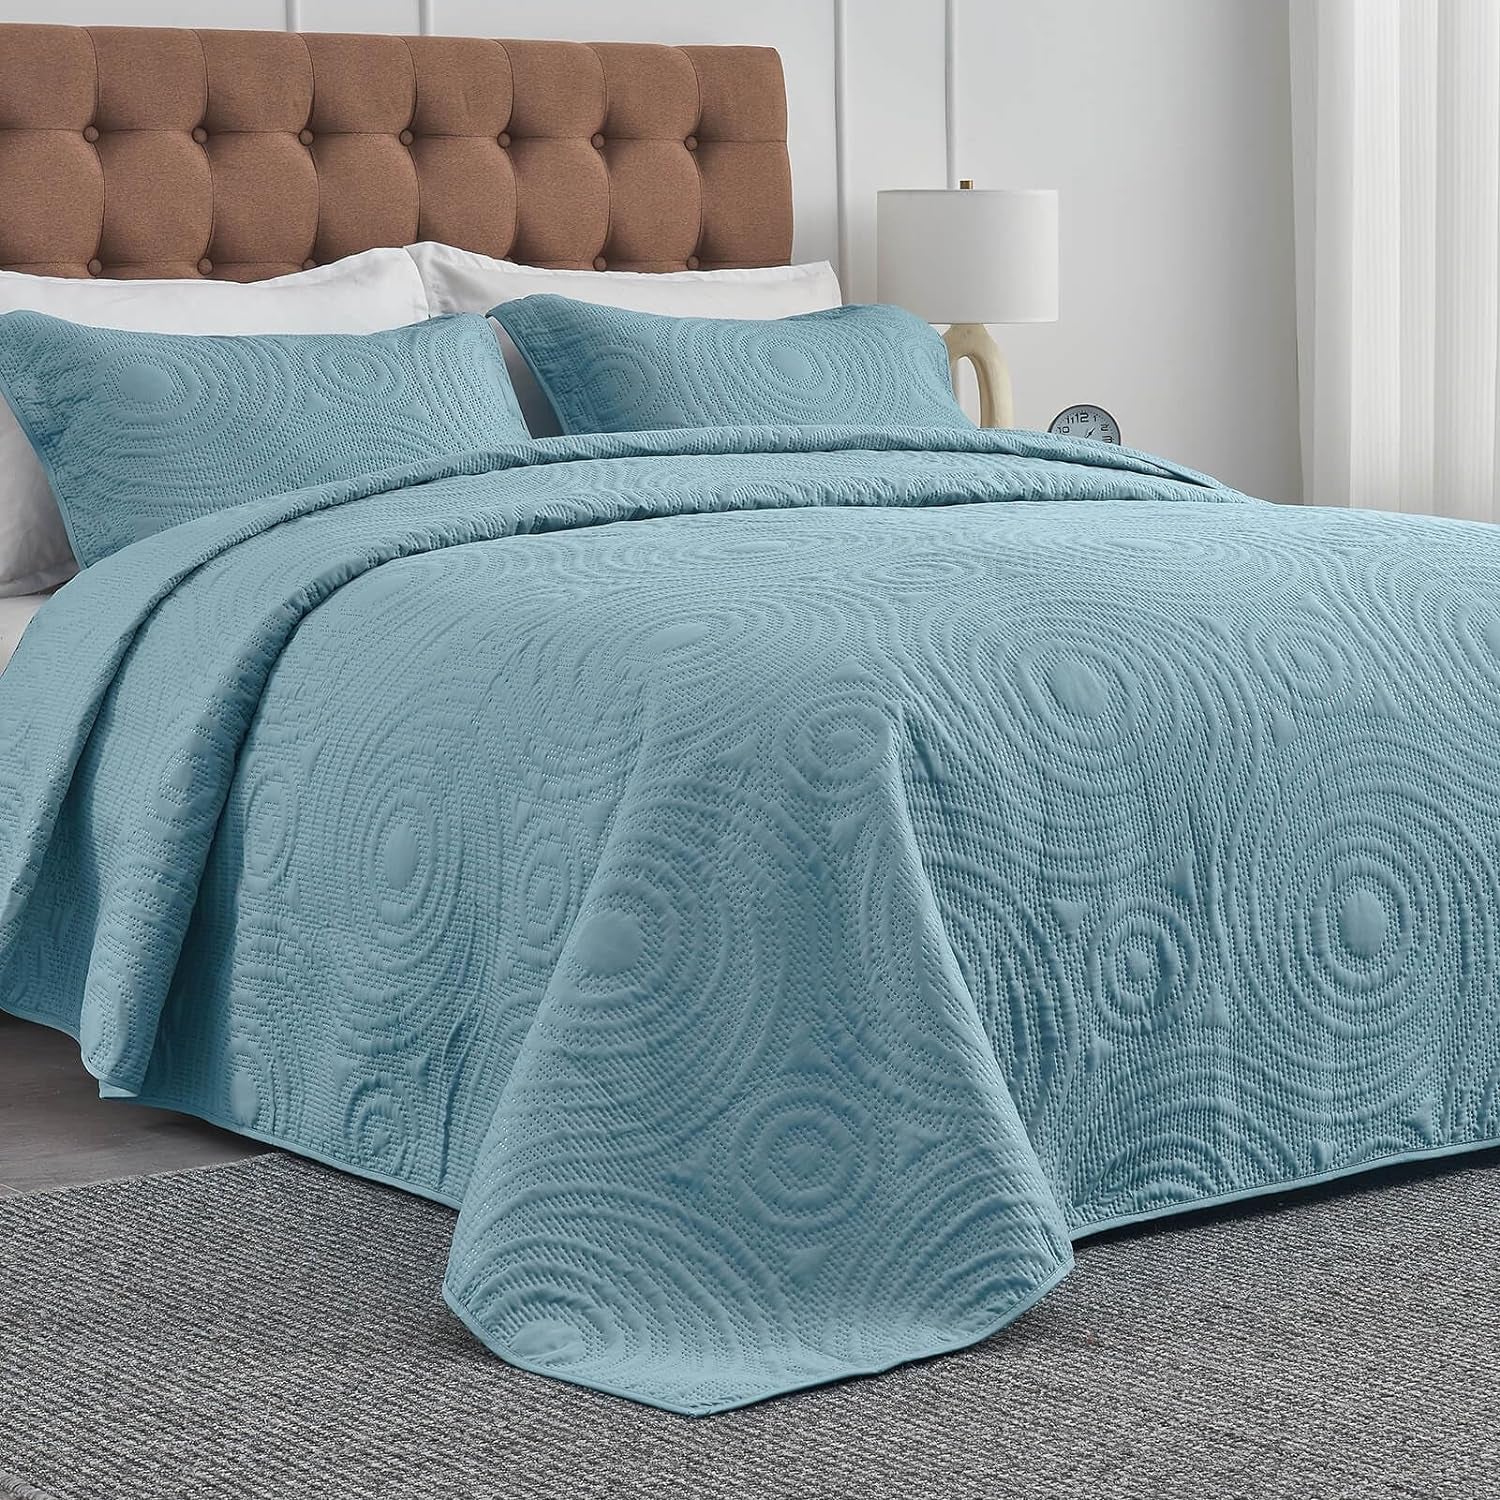 Oversized King Bedspreads 128X120 Lightweight Quilt Set for Extra Tall Wide King or Cal King Bed Includes 1 Quilt 2 Pillow Shams Blue